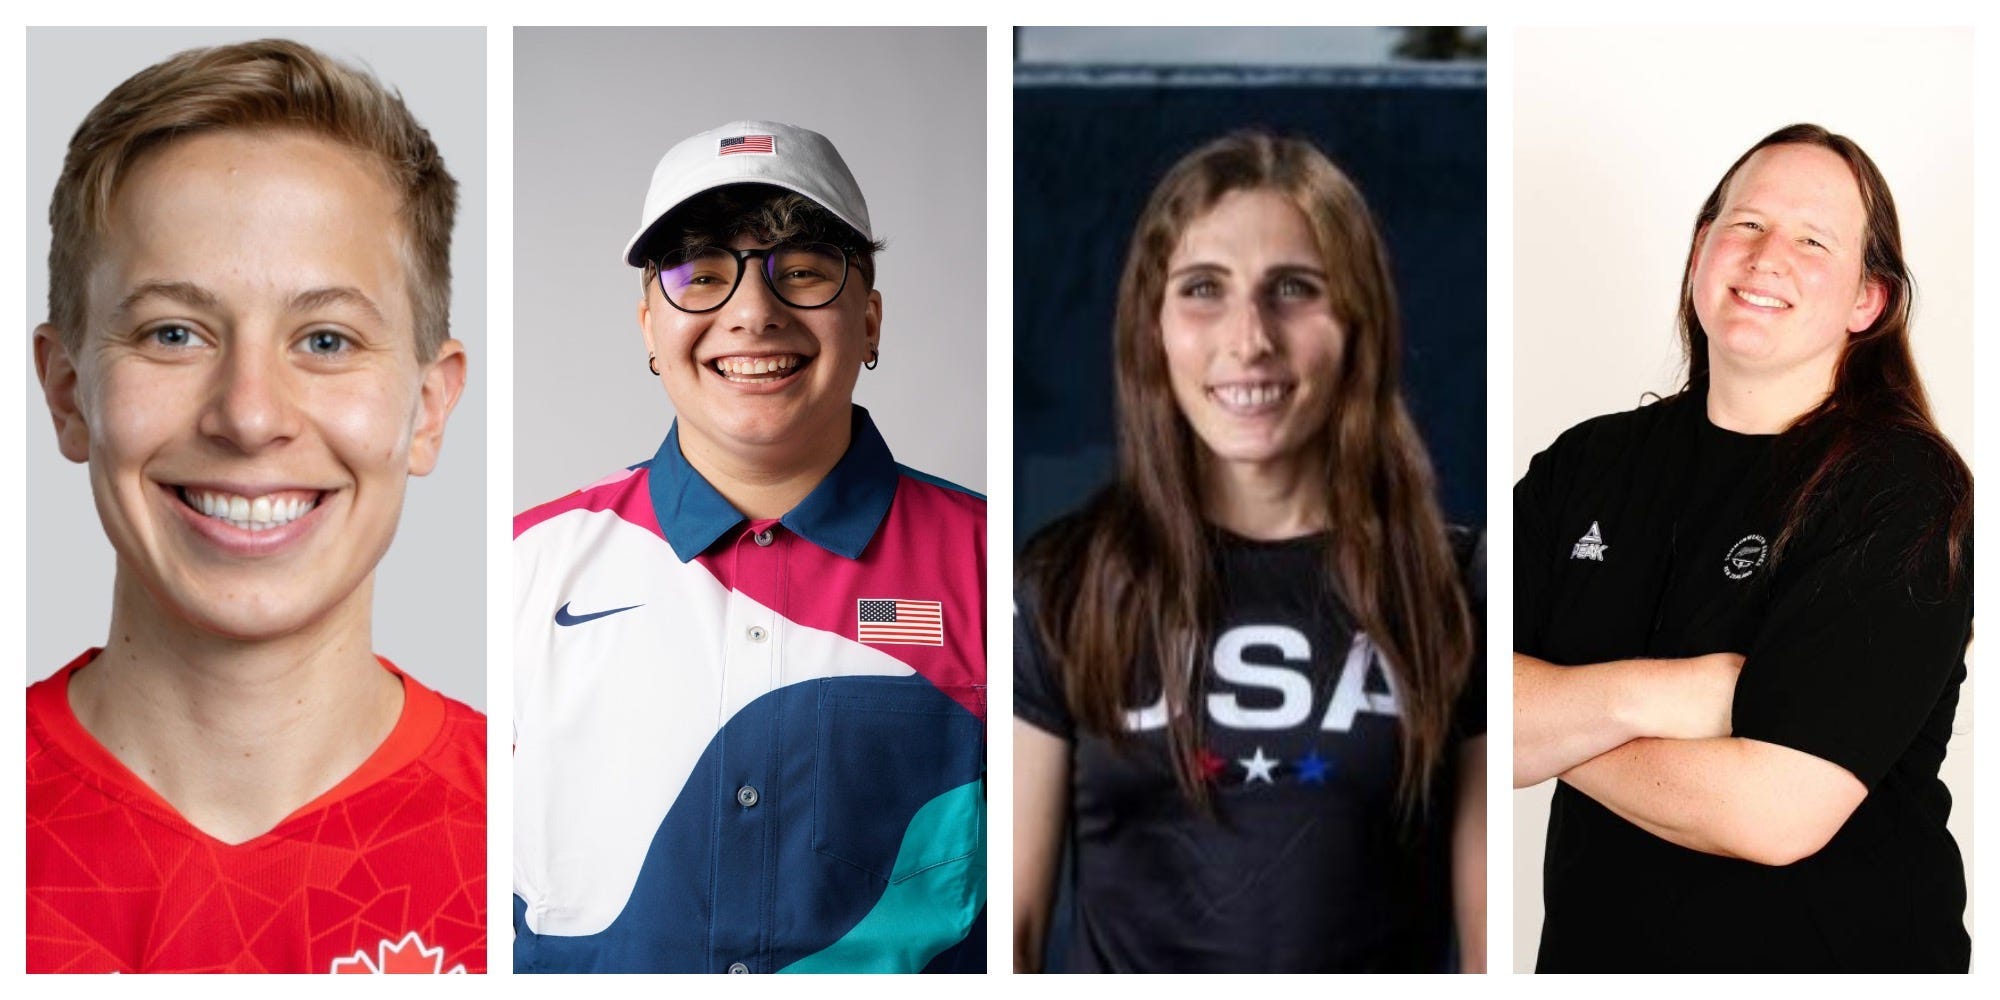 Four trans athletes that competed in the 2020 Olympics